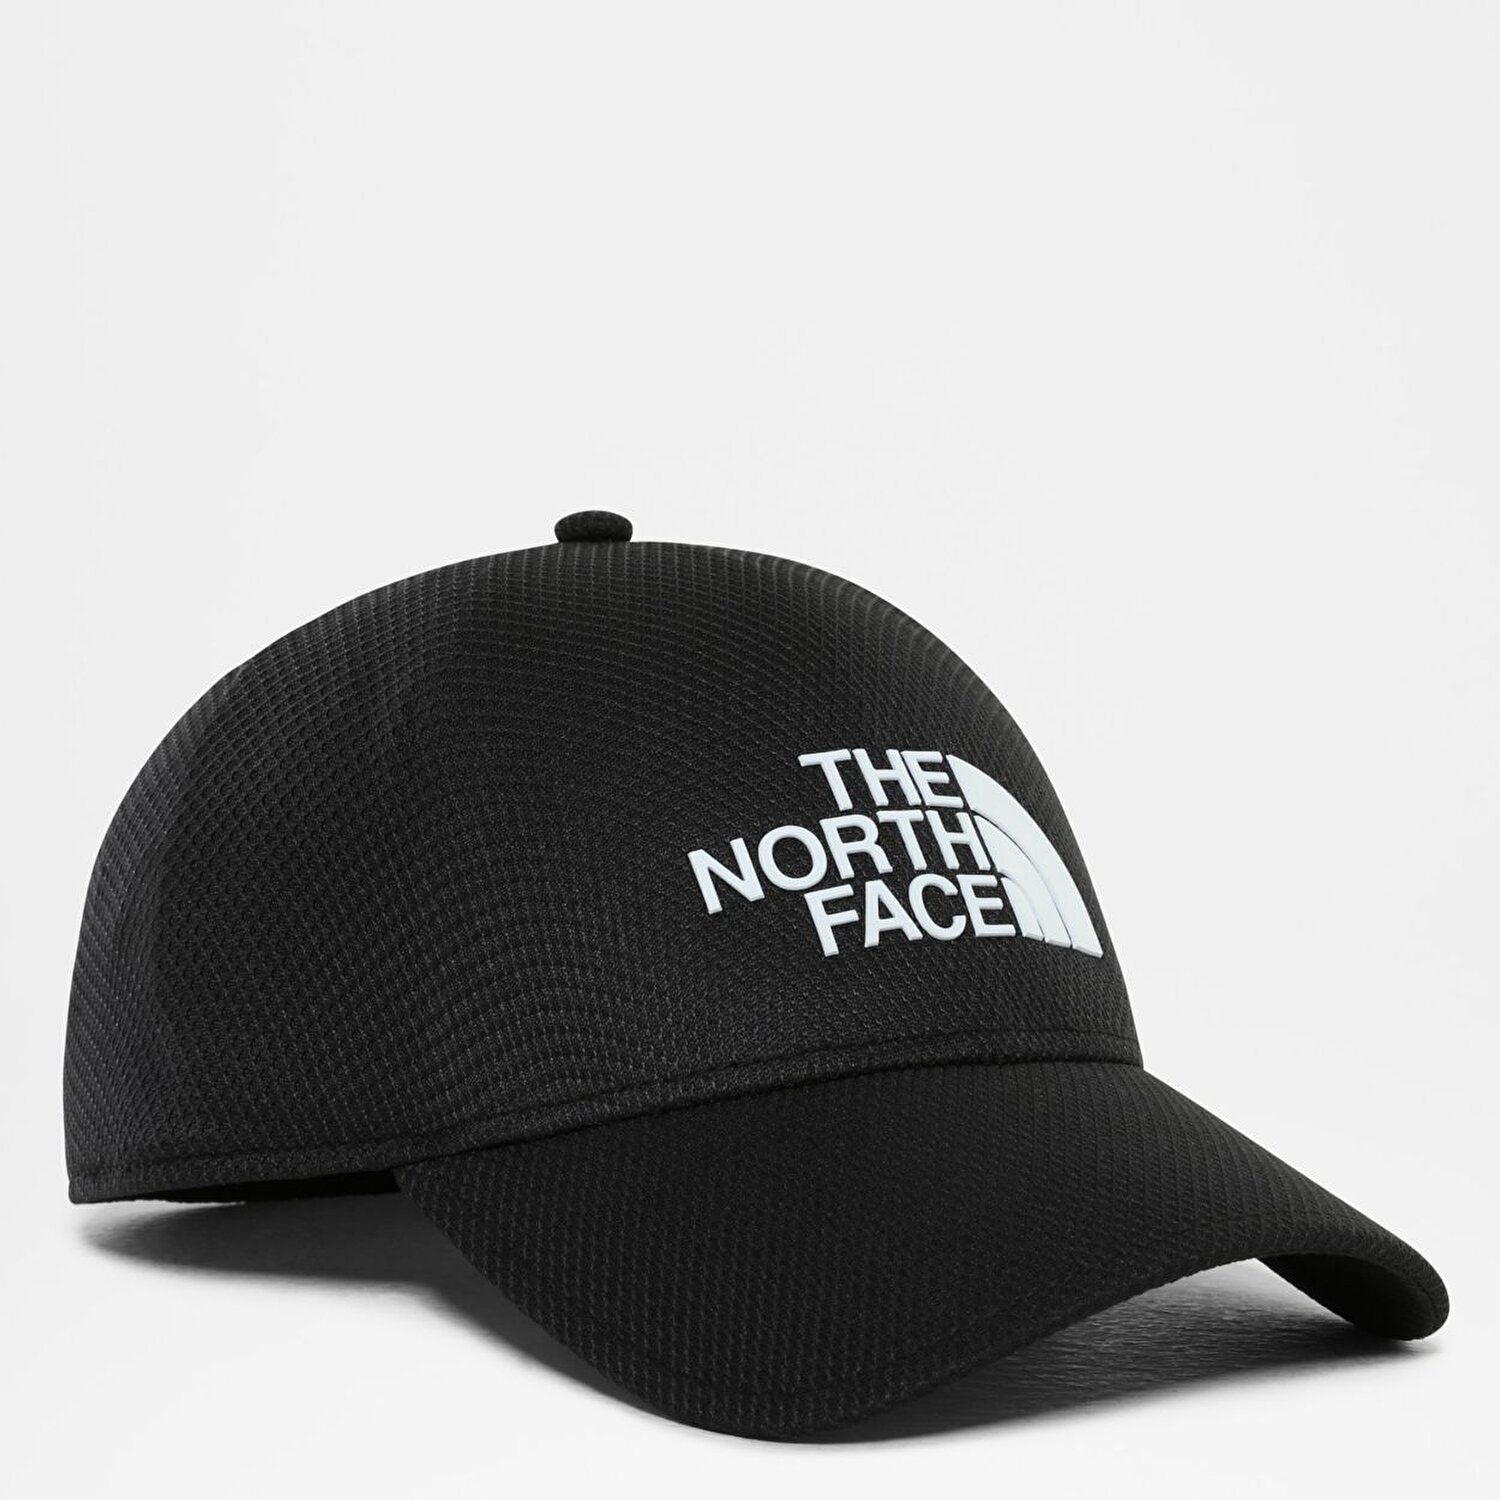 The North Face ONE TOUCH LITE ŞAPKA. 1